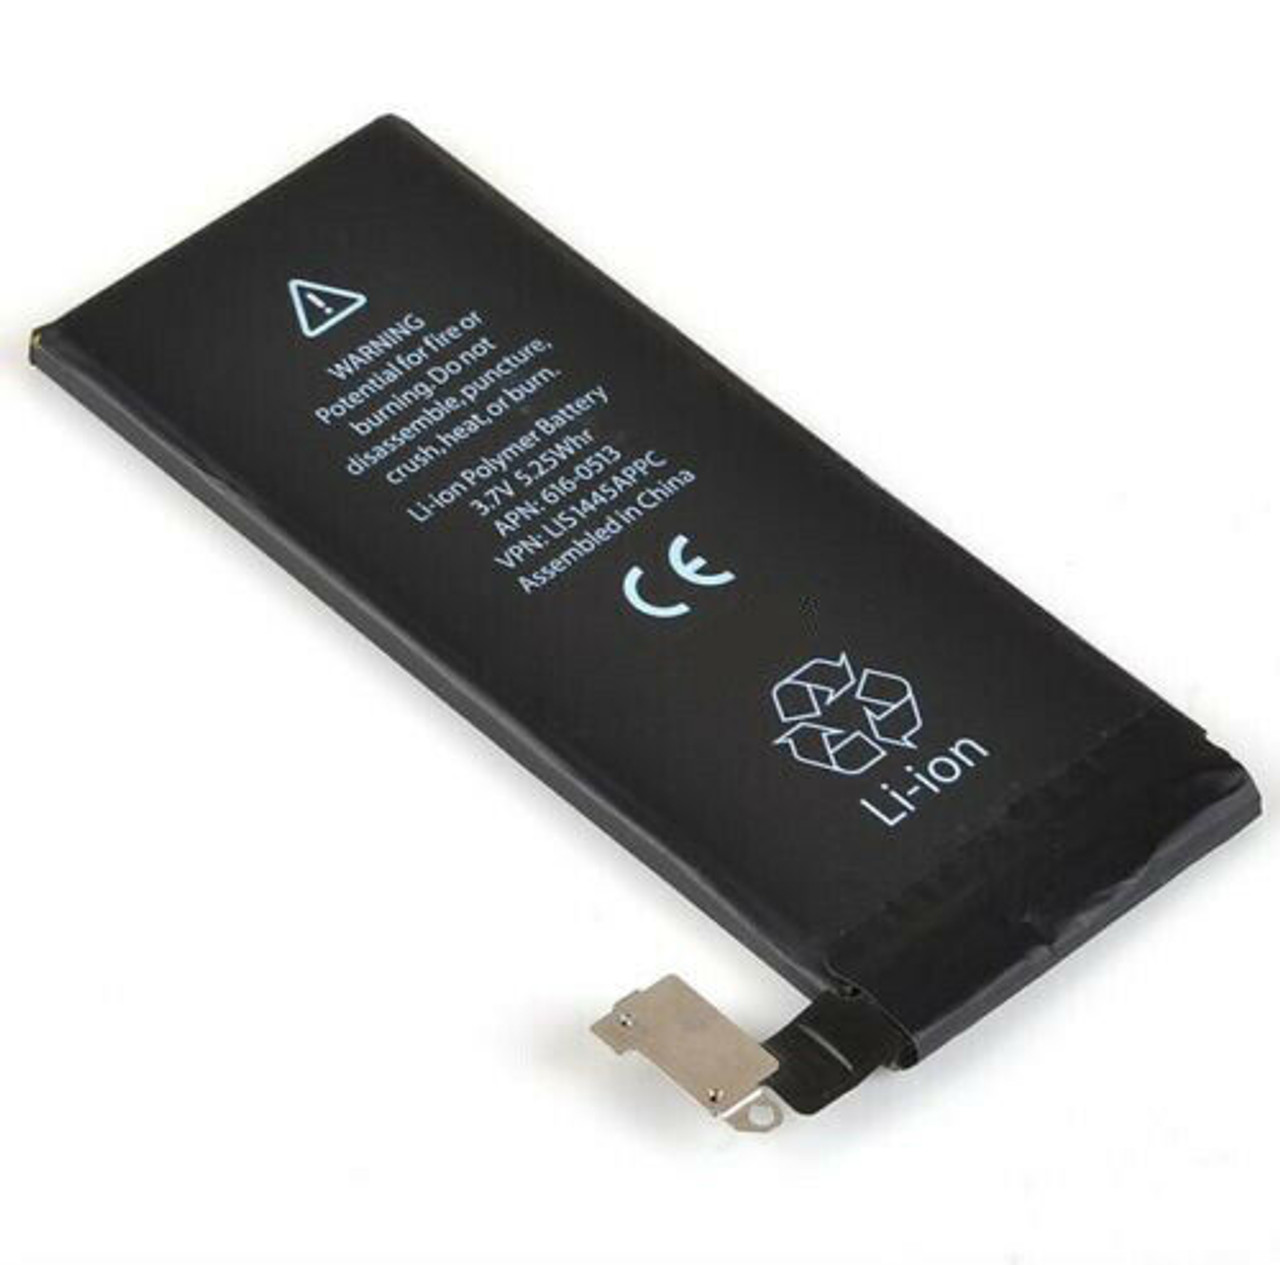 OEM SPEC 1420mAh 3.7V Replacement Internal Battery For Apple iPhone 4 GSM CDMA